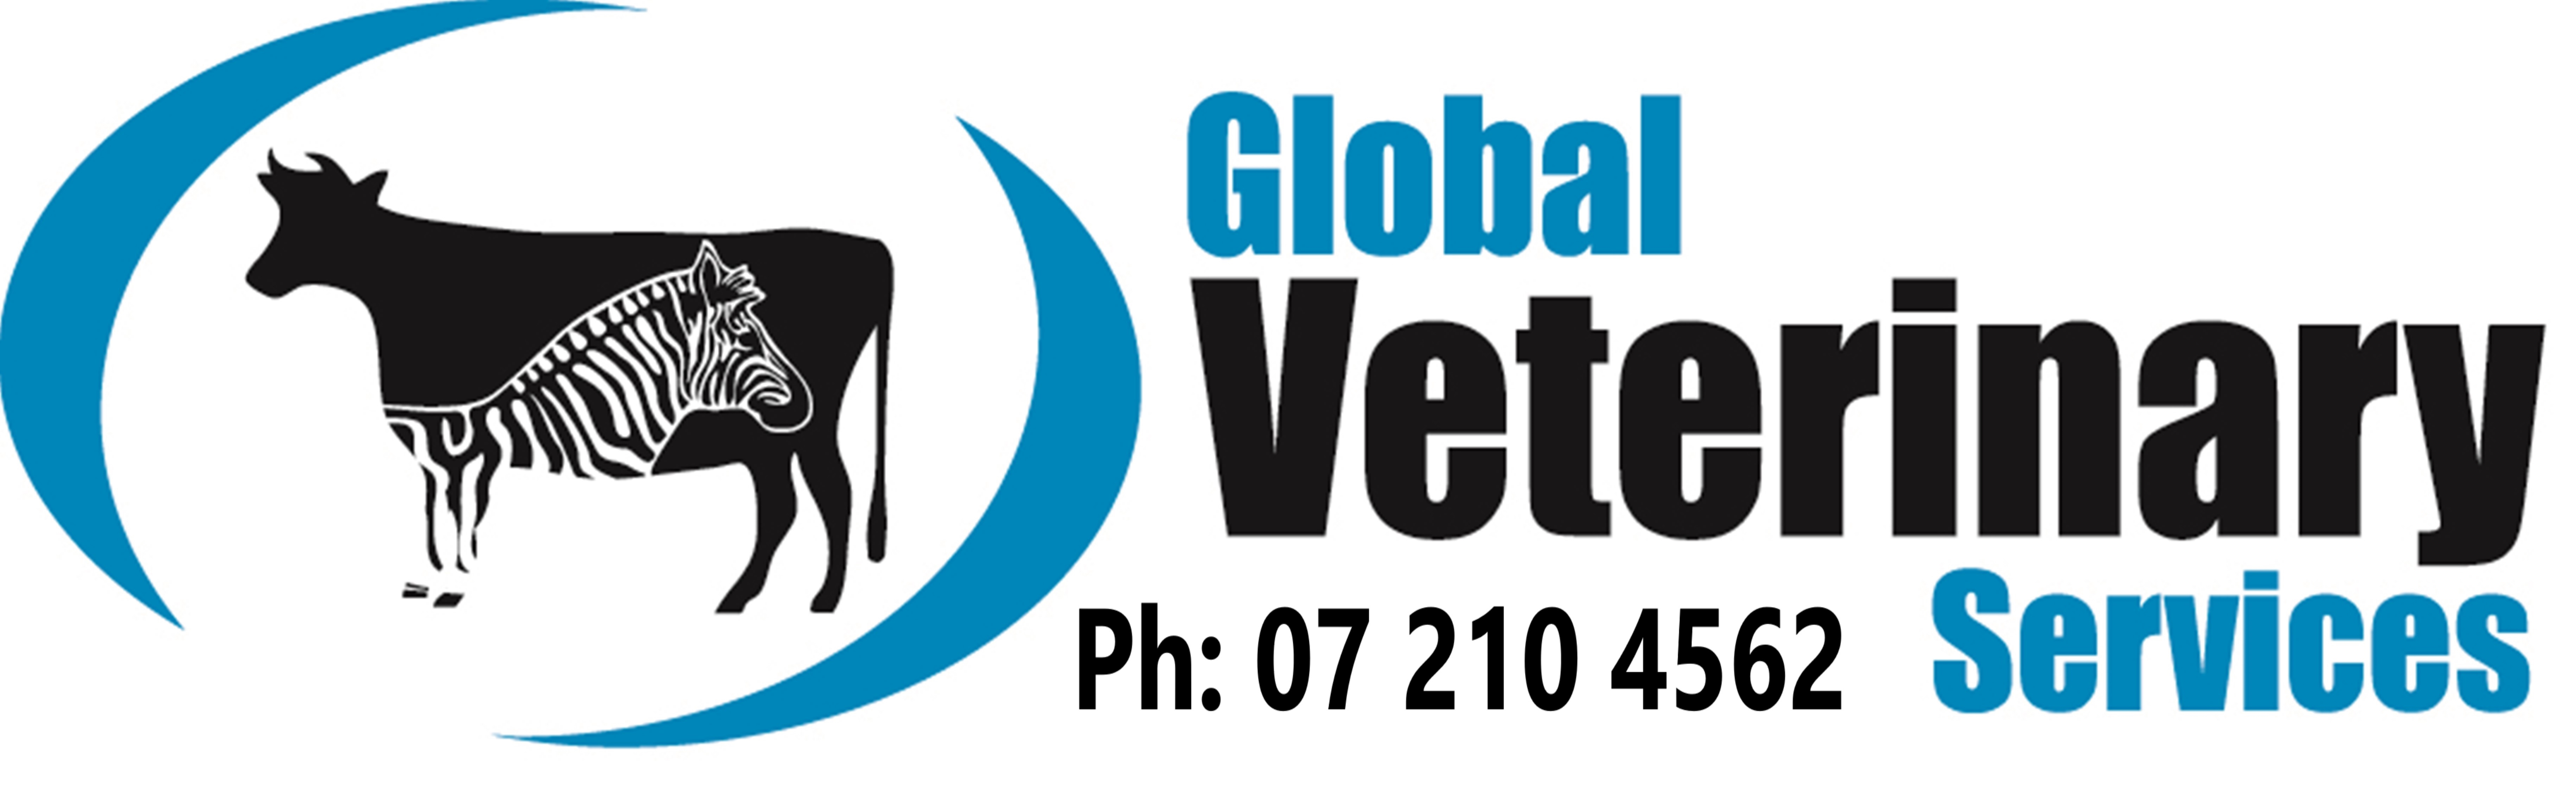 Global Veterinary Services 